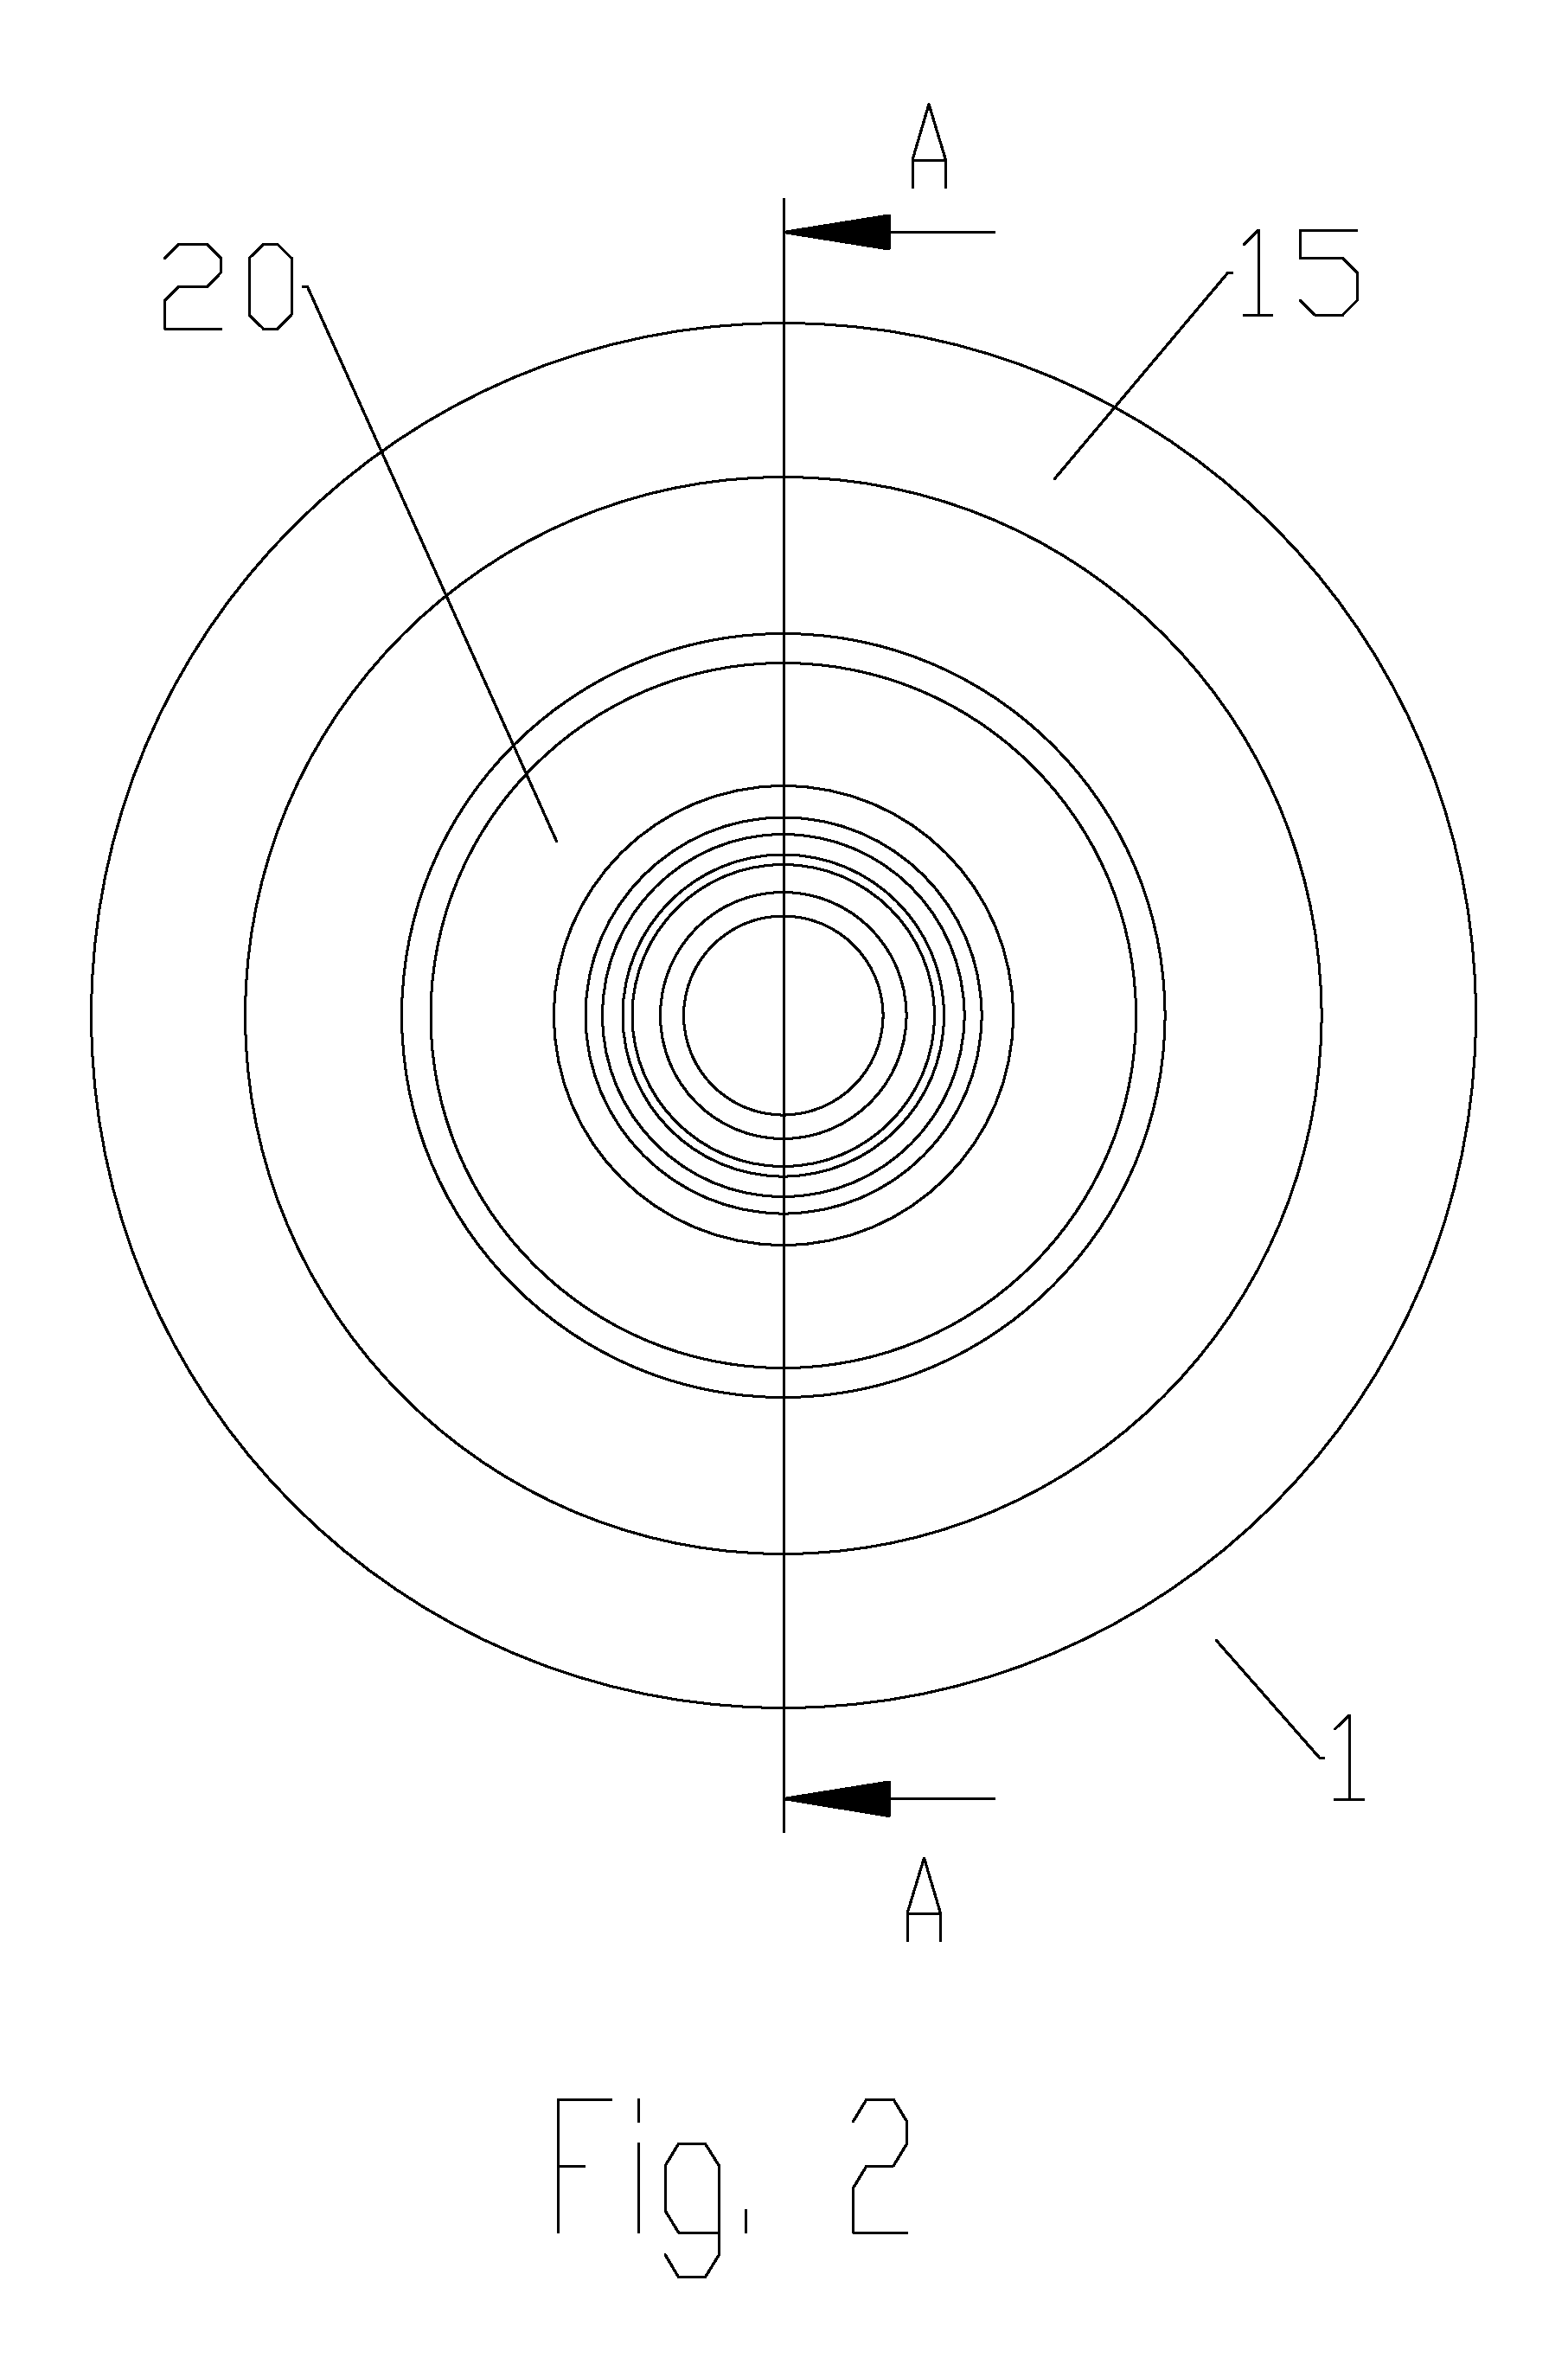 Dielectric lens cone radiator sub-reflector assembly